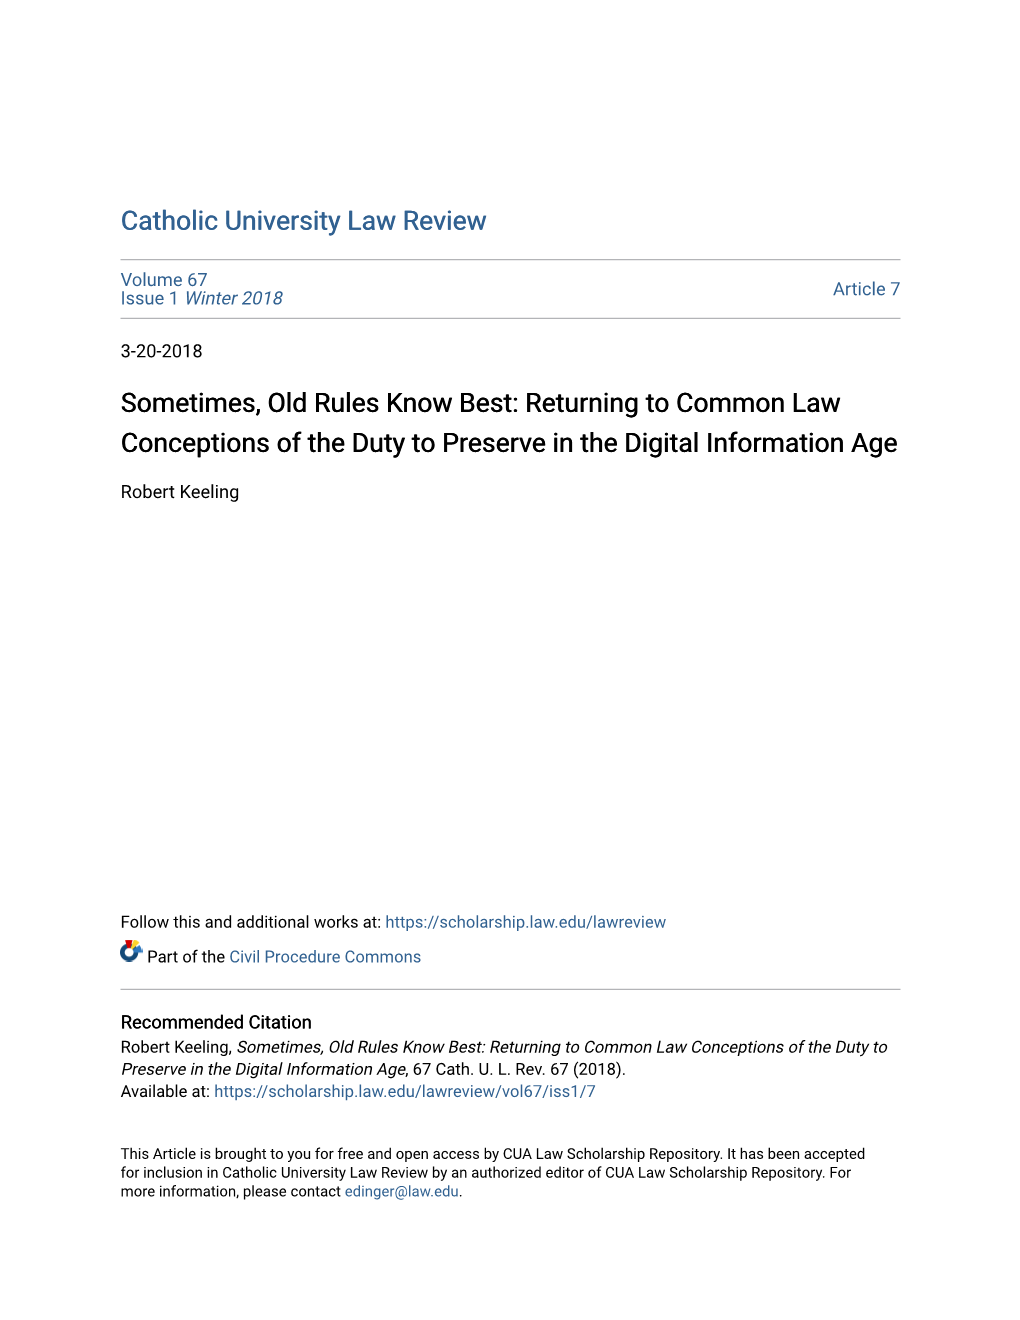 Returning to Common Law Conceptions of the Duty to Preserve in the Digital Information Age